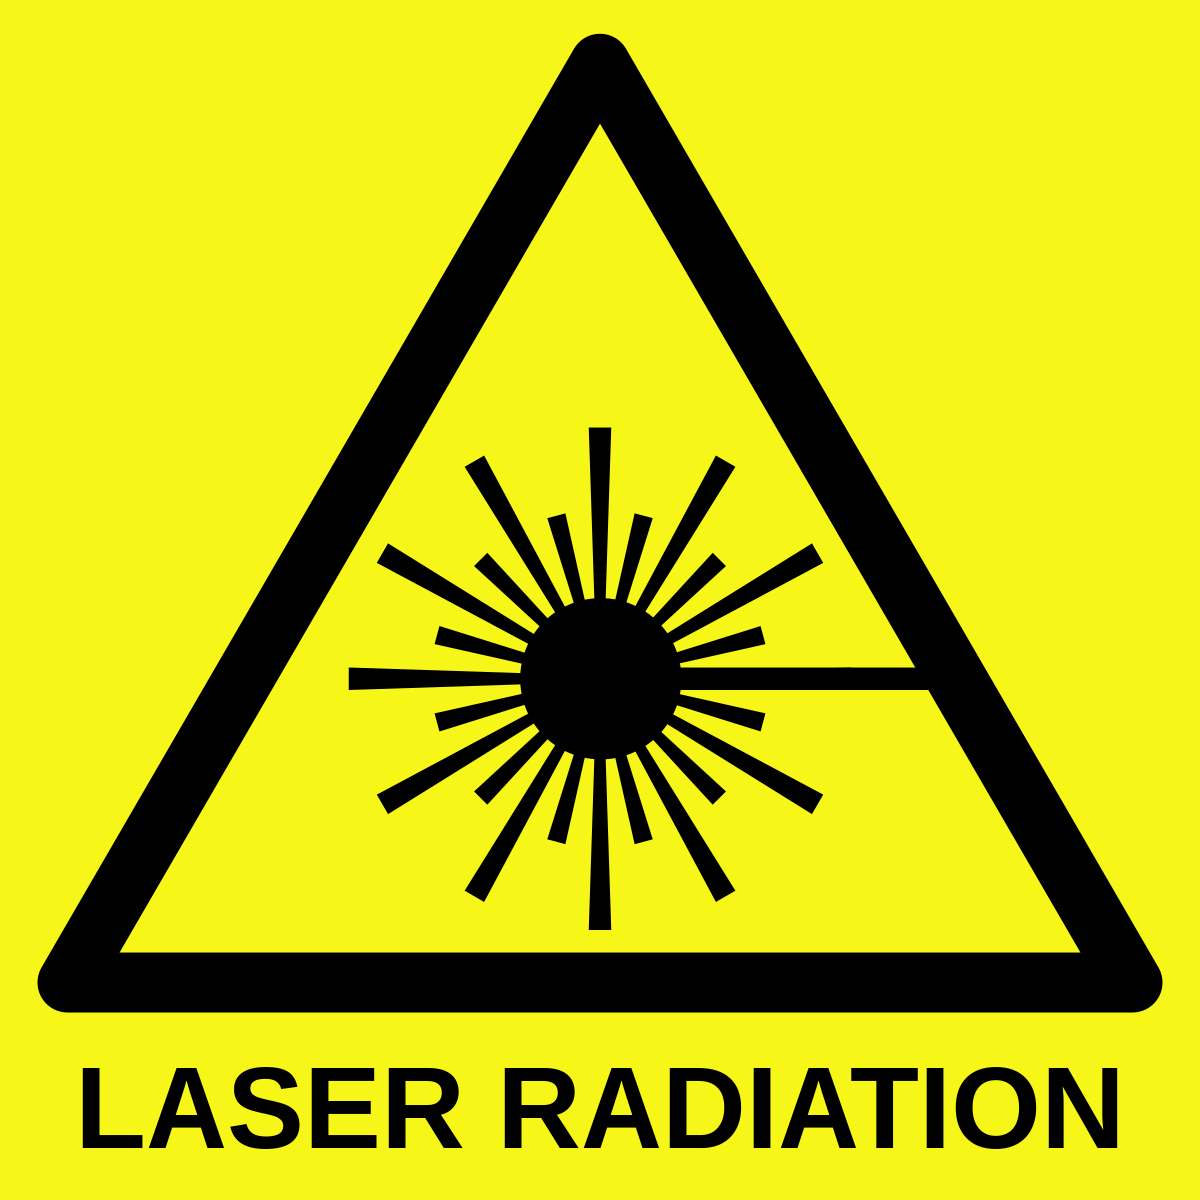 Laser Device In Use�Made in the USA OSHA WARNING Sign 